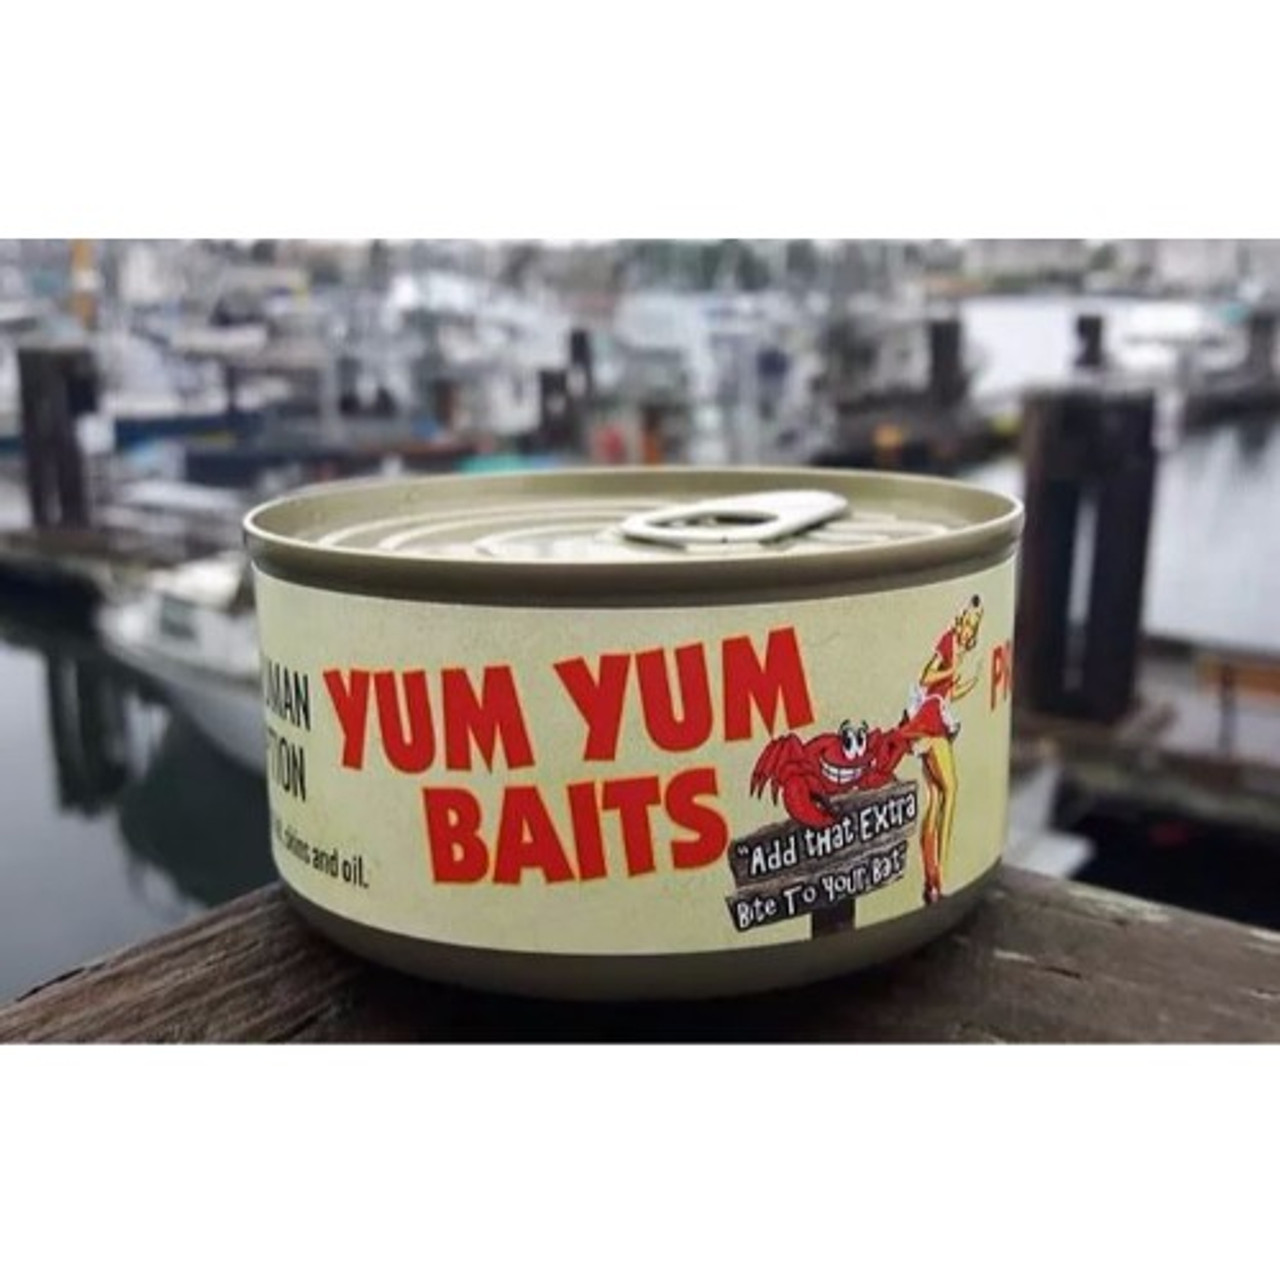 https://cdn11.bigcommerce.com/s-juamt7rae6/images/stencil/1280x1280/products/599/1007/Yum-Yum-Baits-Canned-Prawn-_-Crab-Bait__69916.1626796702.jpg?c=1?imbypass=on